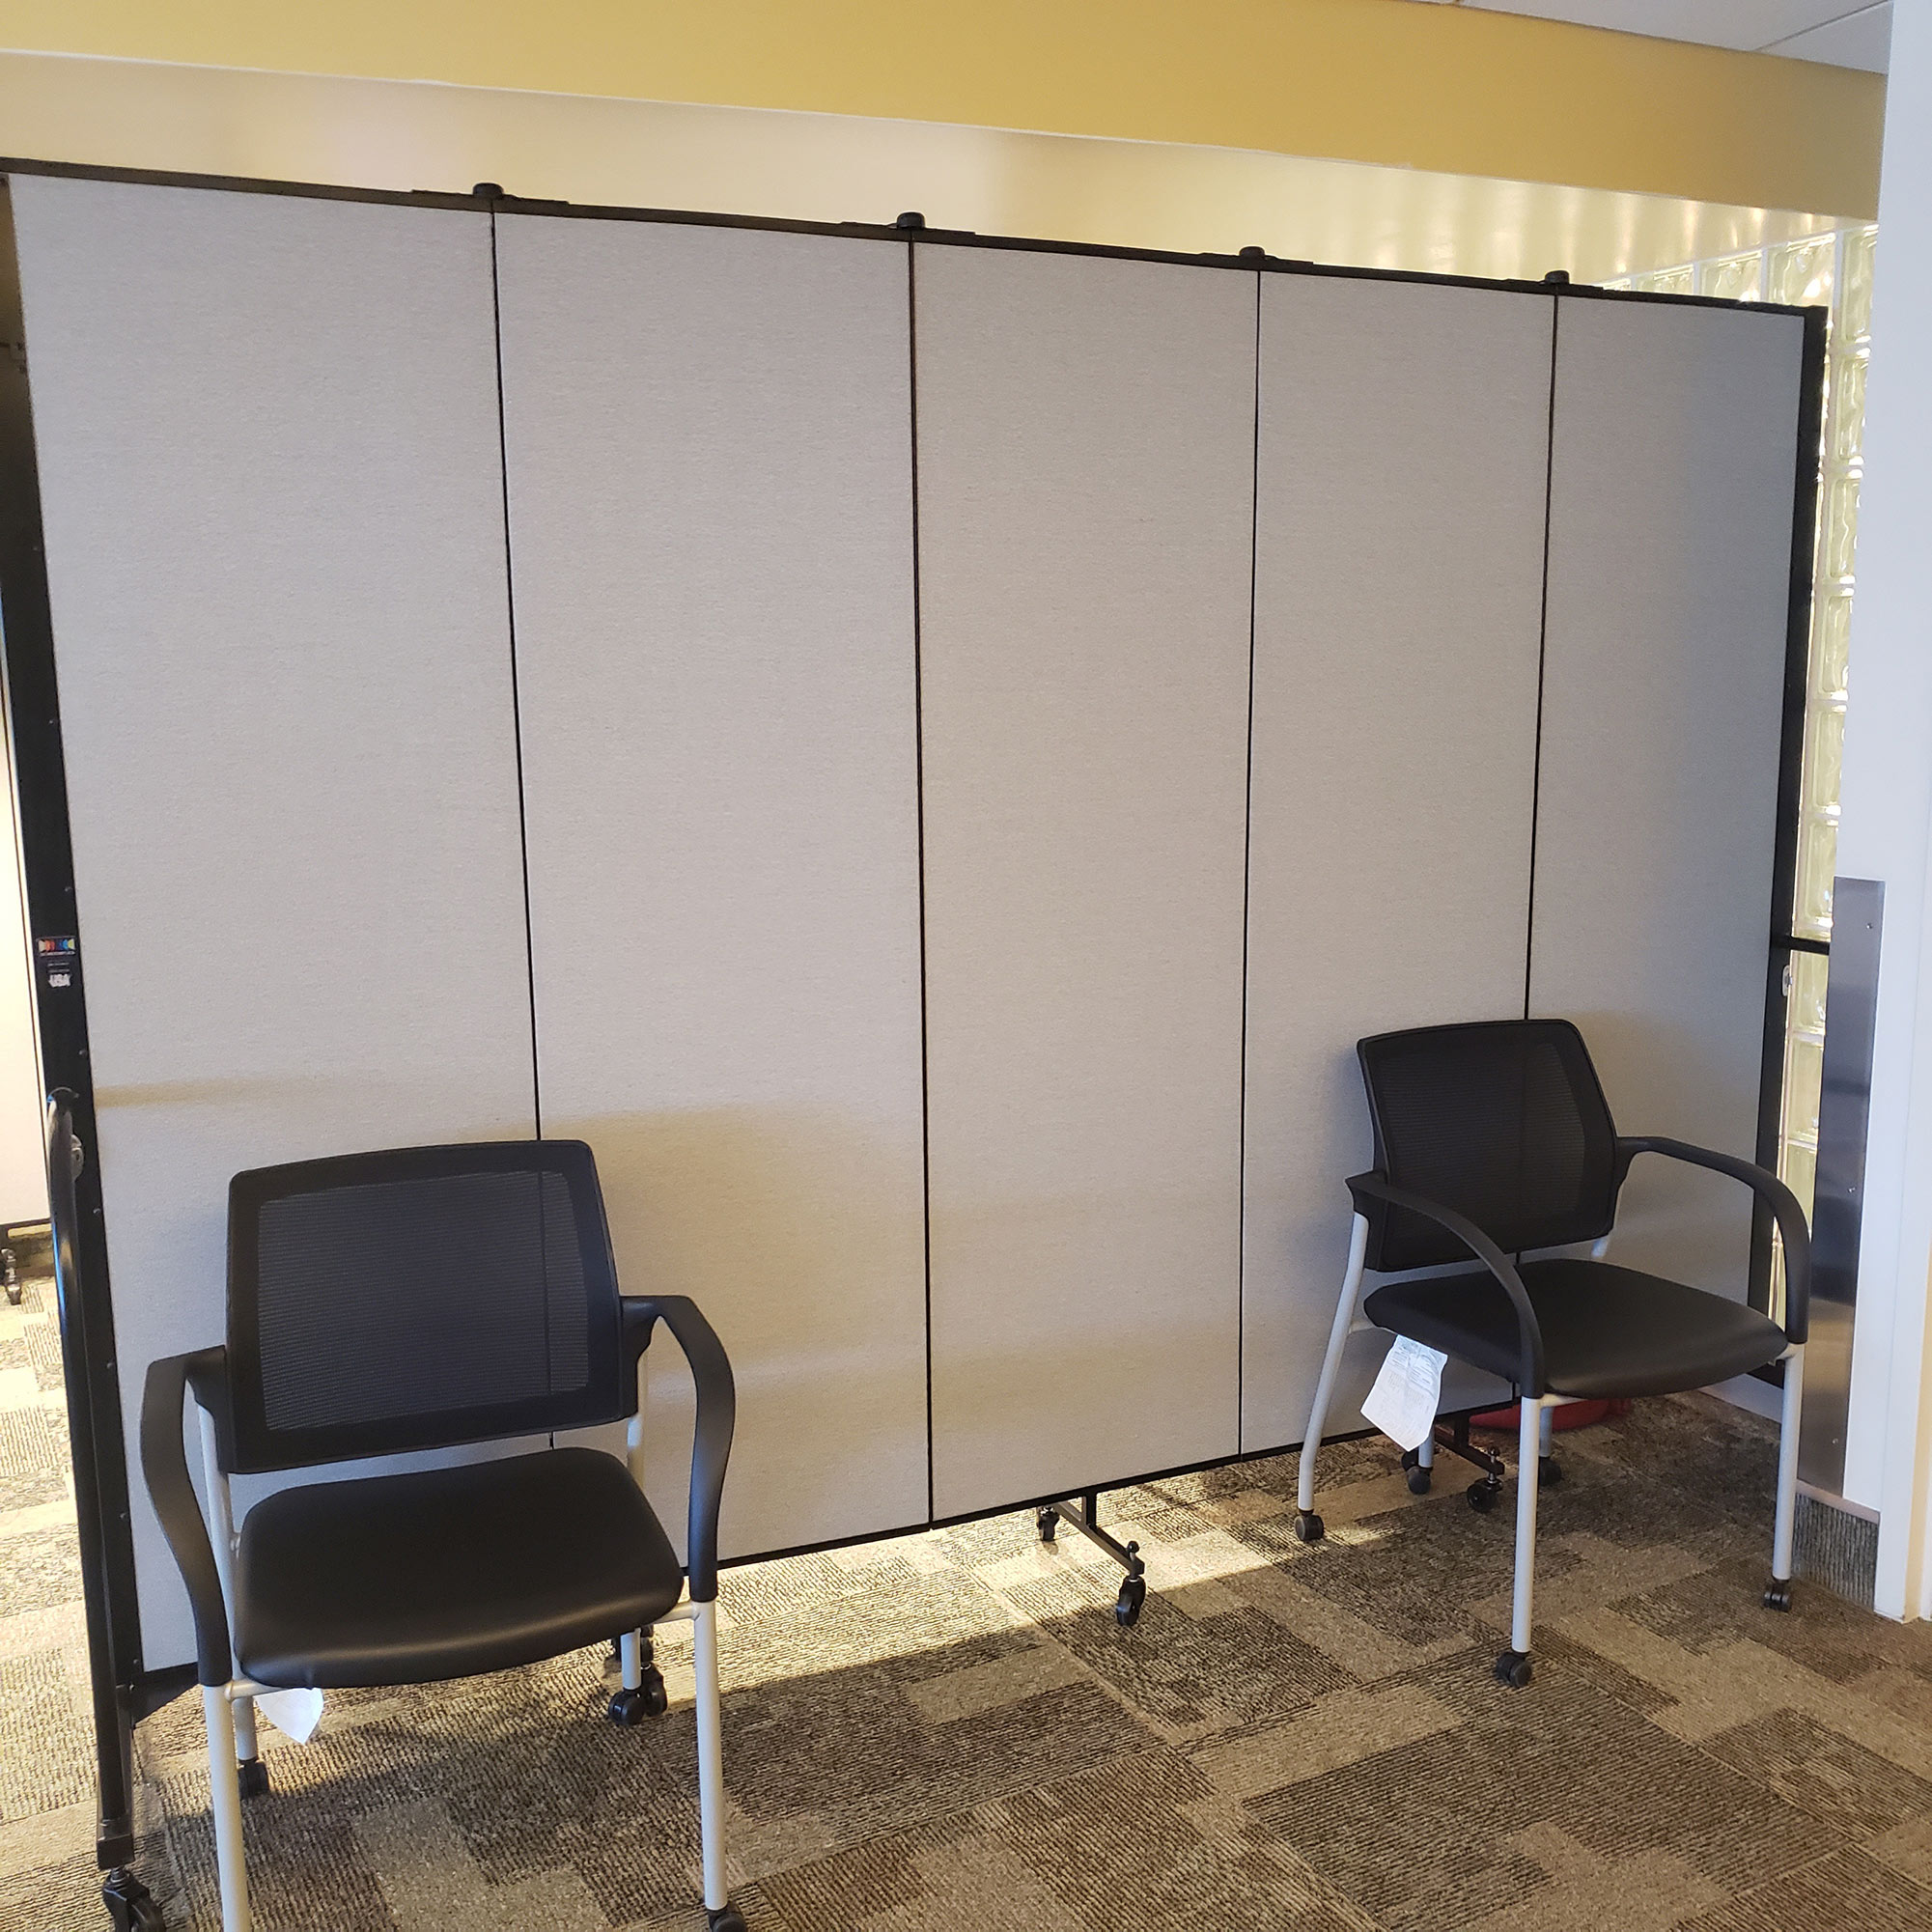 Portable walls creating a temporary waiting area for patients